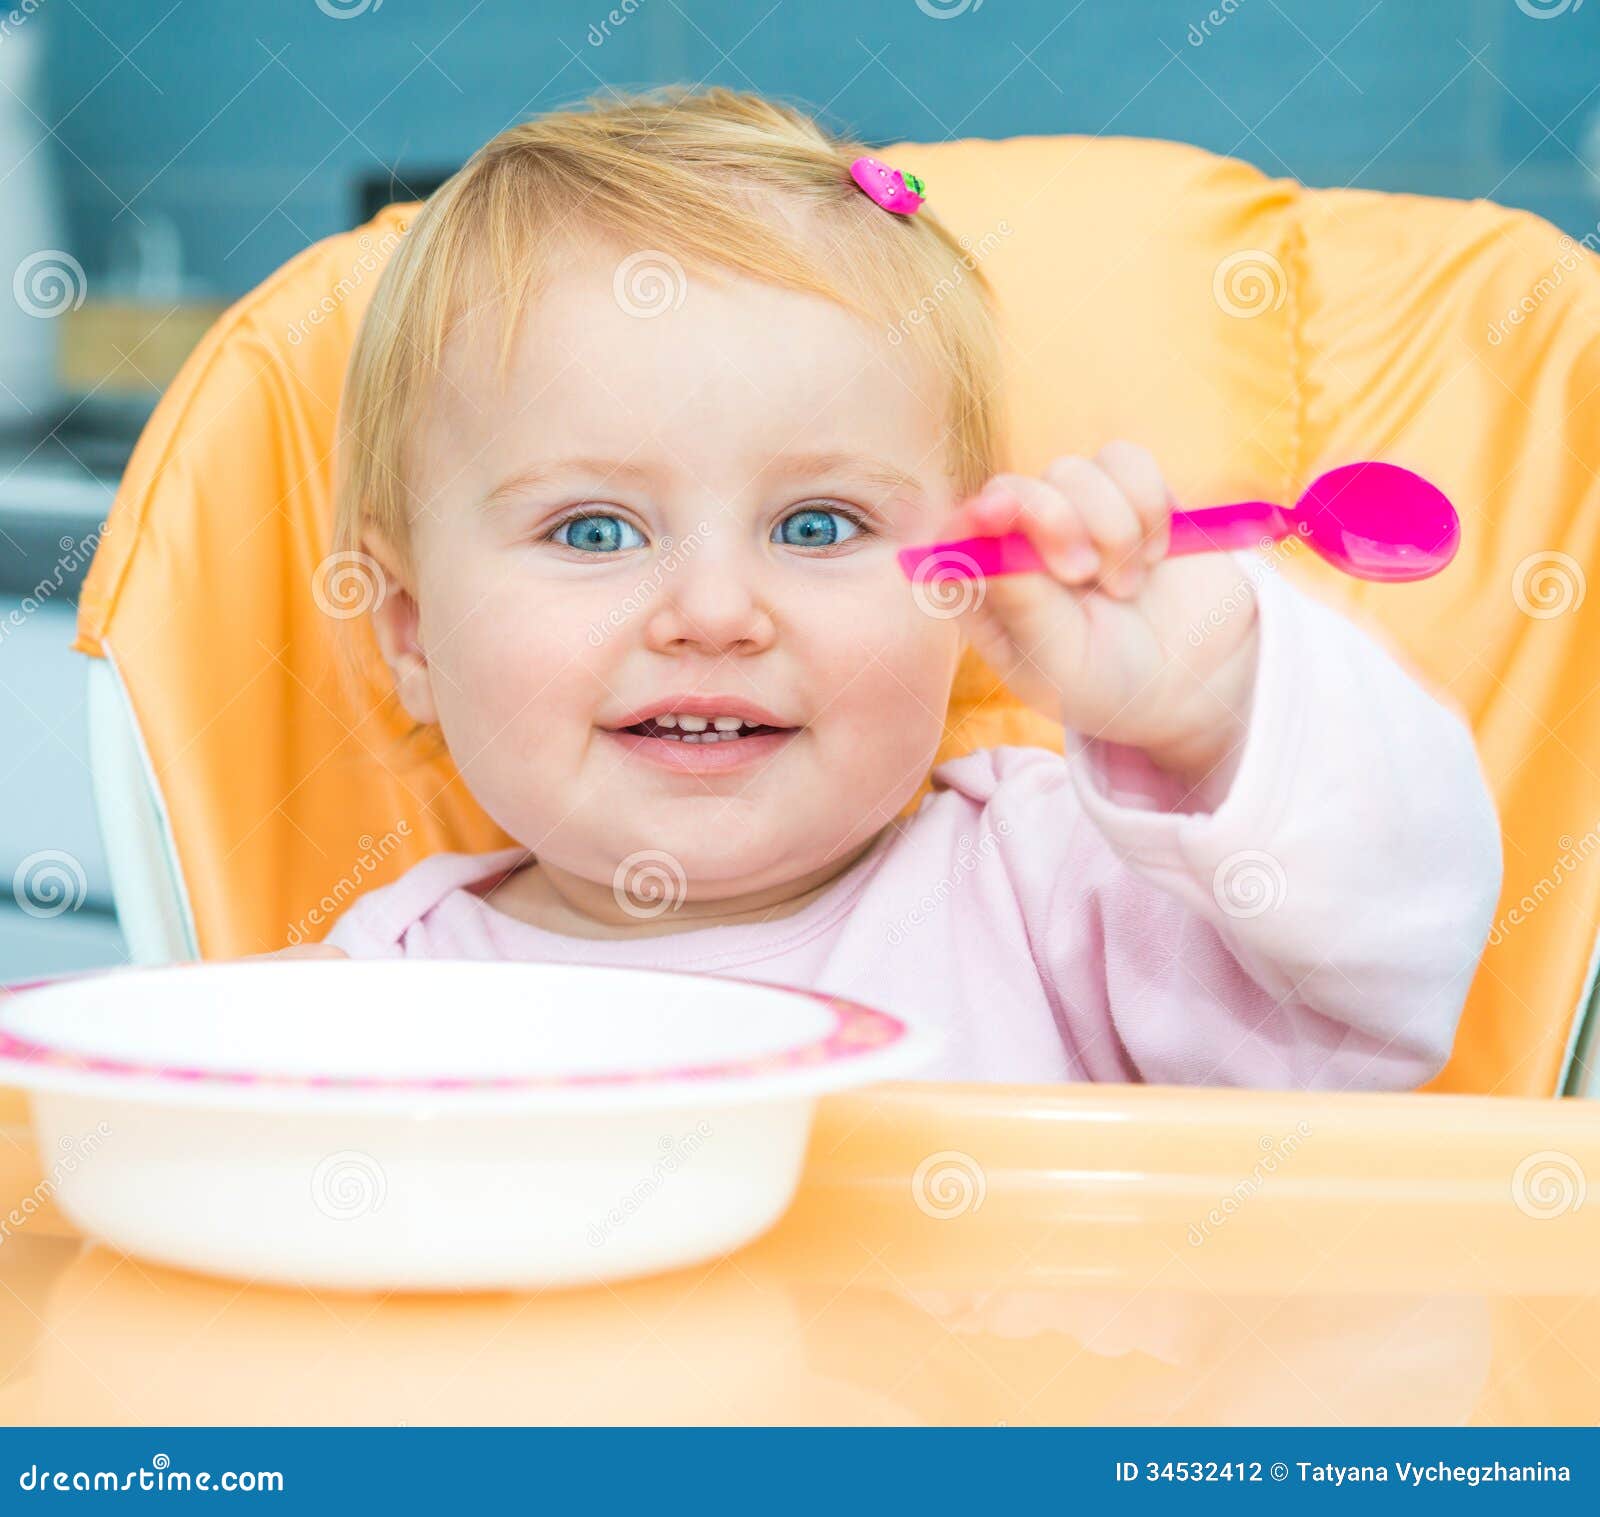 One Year Old Girl In A Highchair For Feeding Stock Photo Image